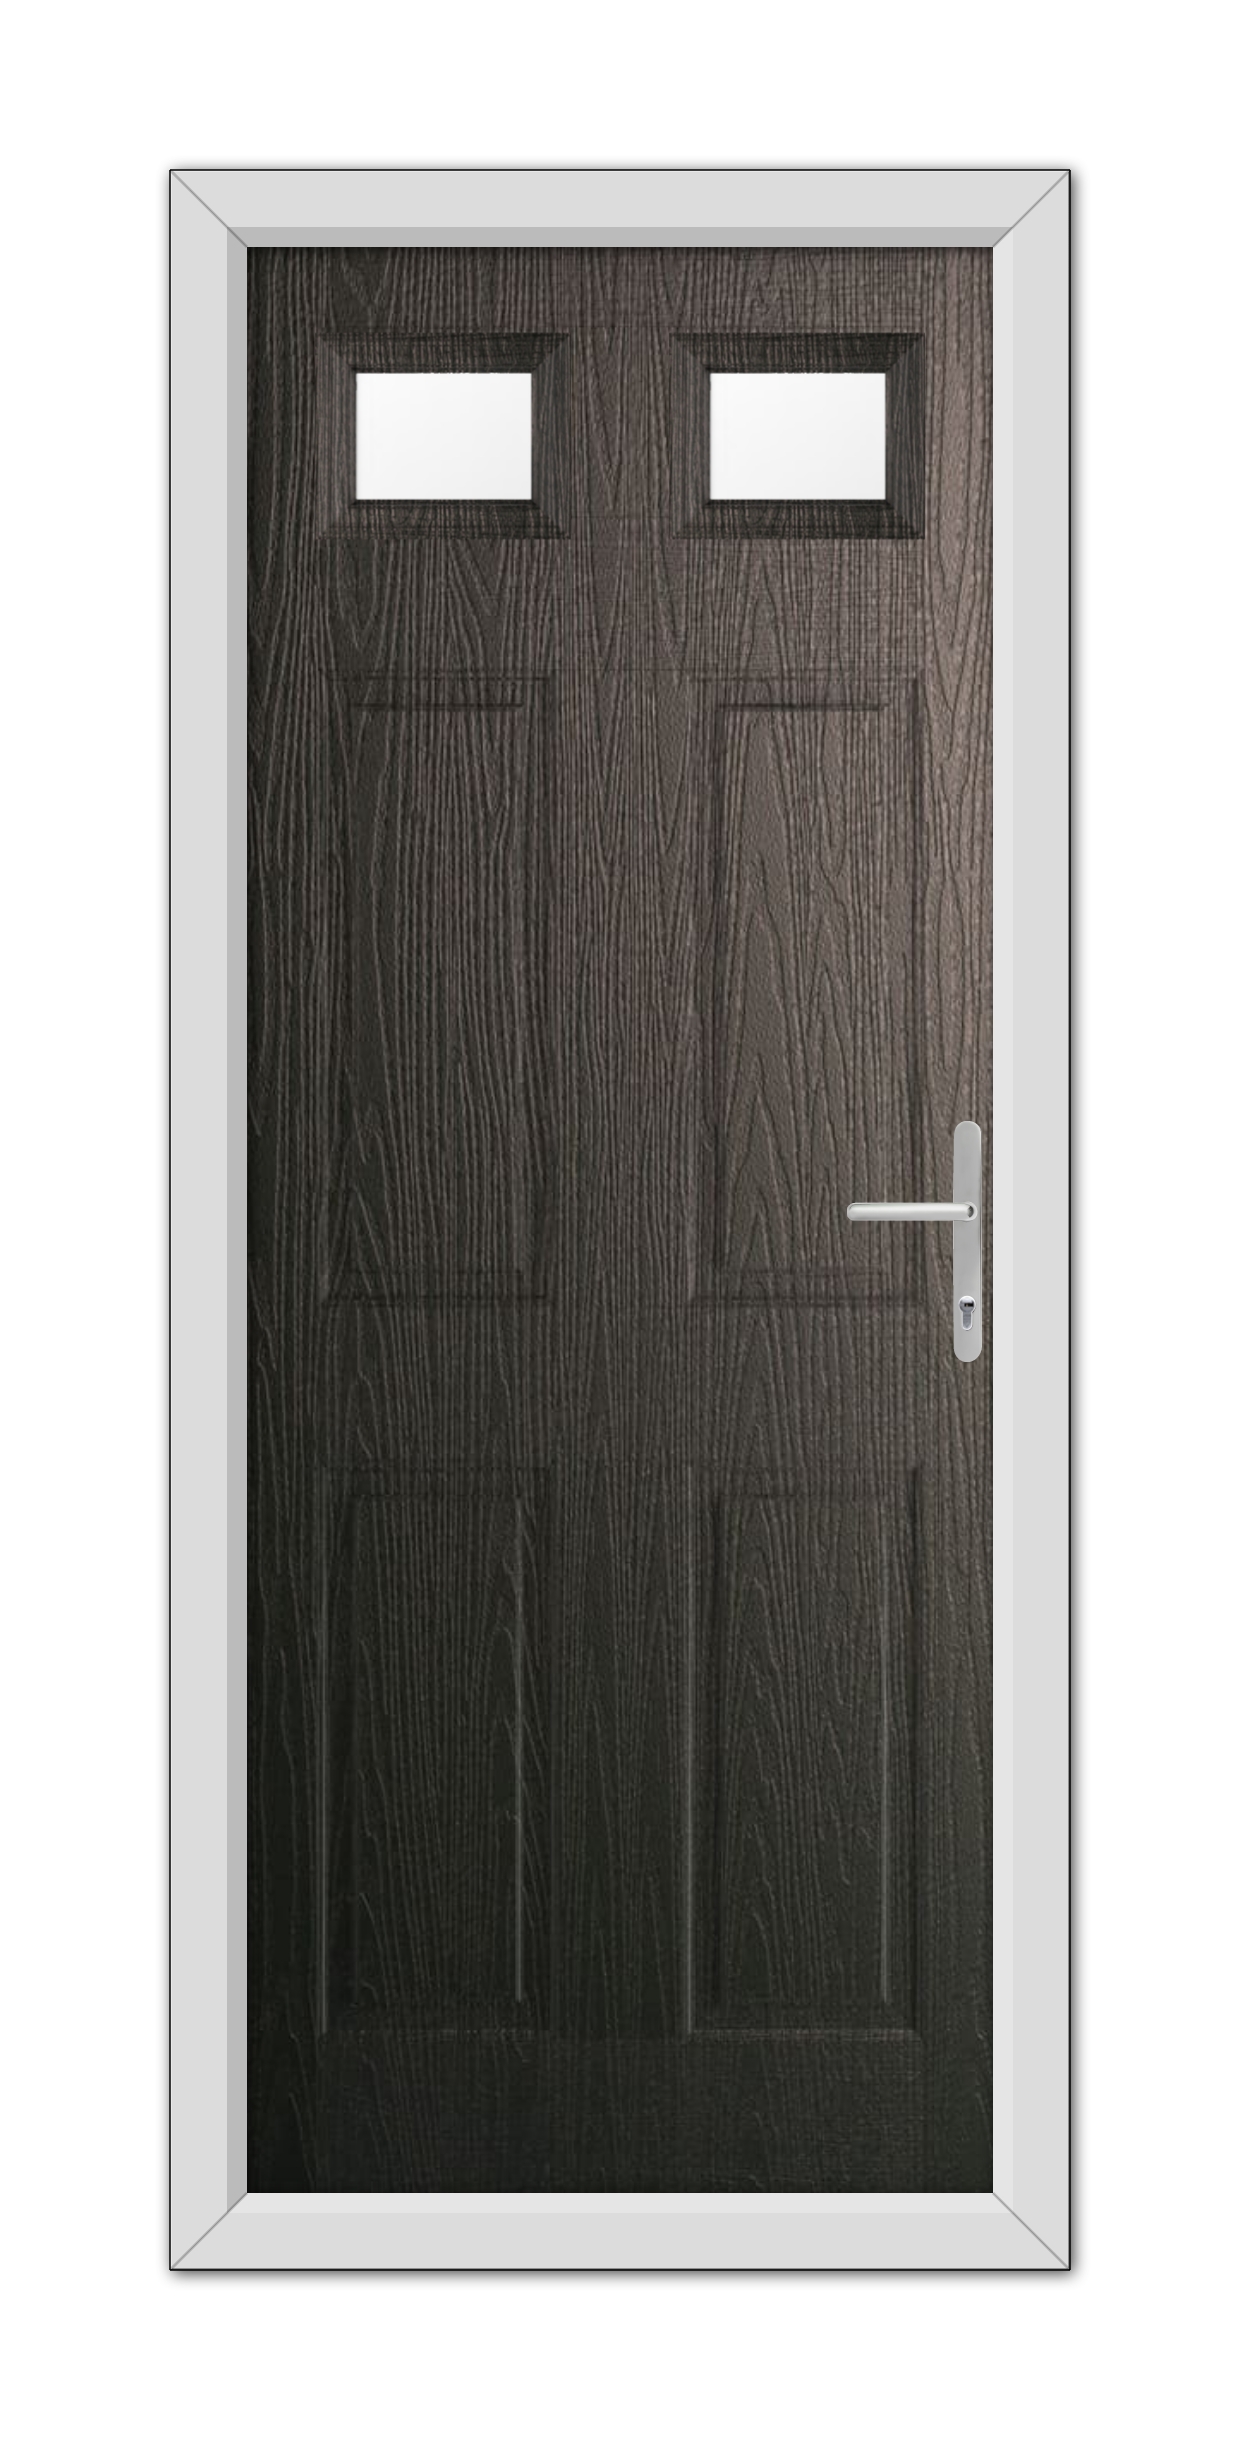 A Schwarzbraun Middleton Glazed 2 Composite Door 48mm Timber Core with two rectangular windows and a silver handle, set within a white frame.